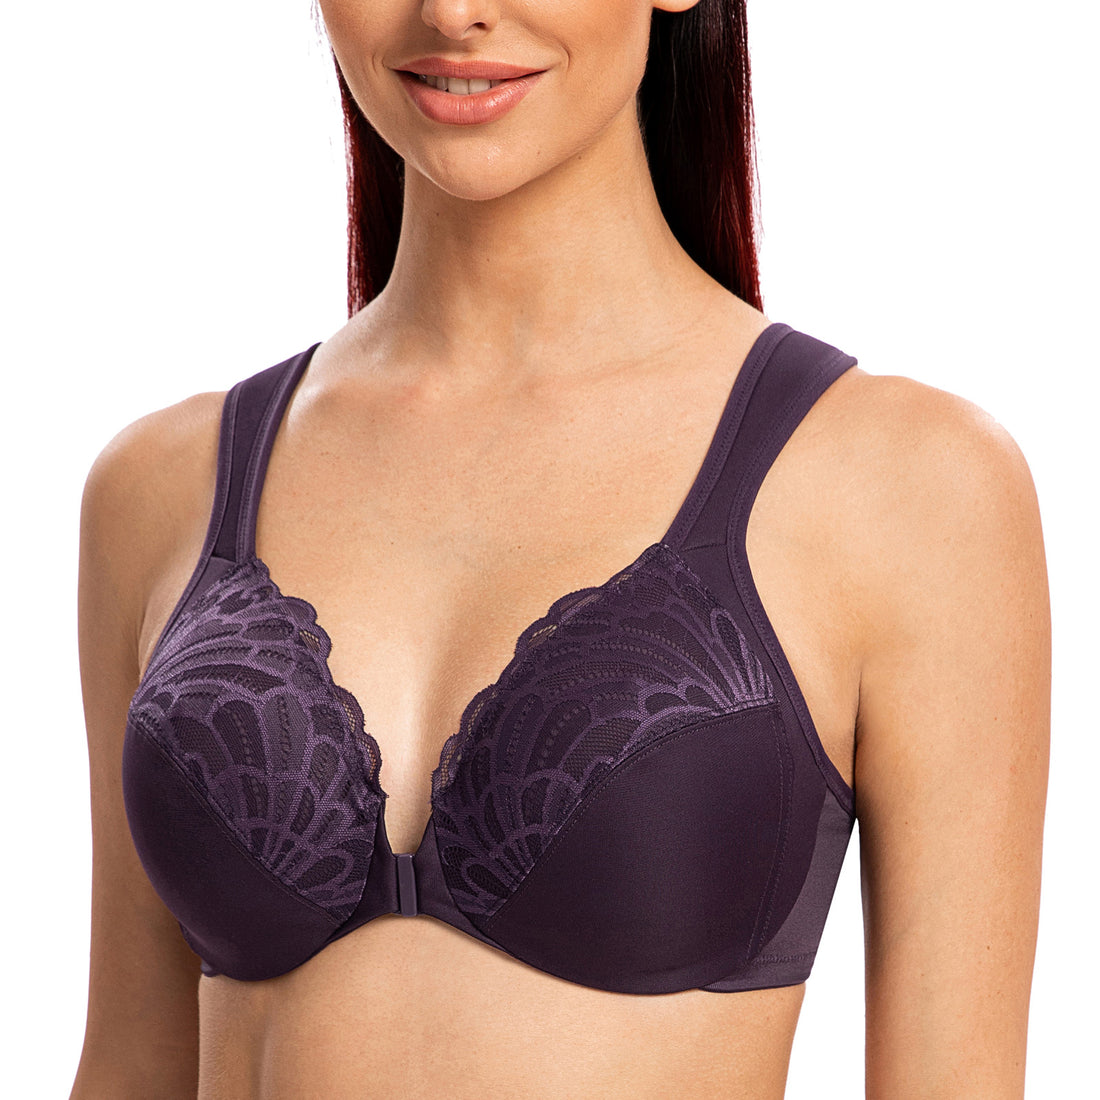 Meleneca Front Closure Bras For Women Plus Size Underwire Unlined Lace Cup Cushion Strap 